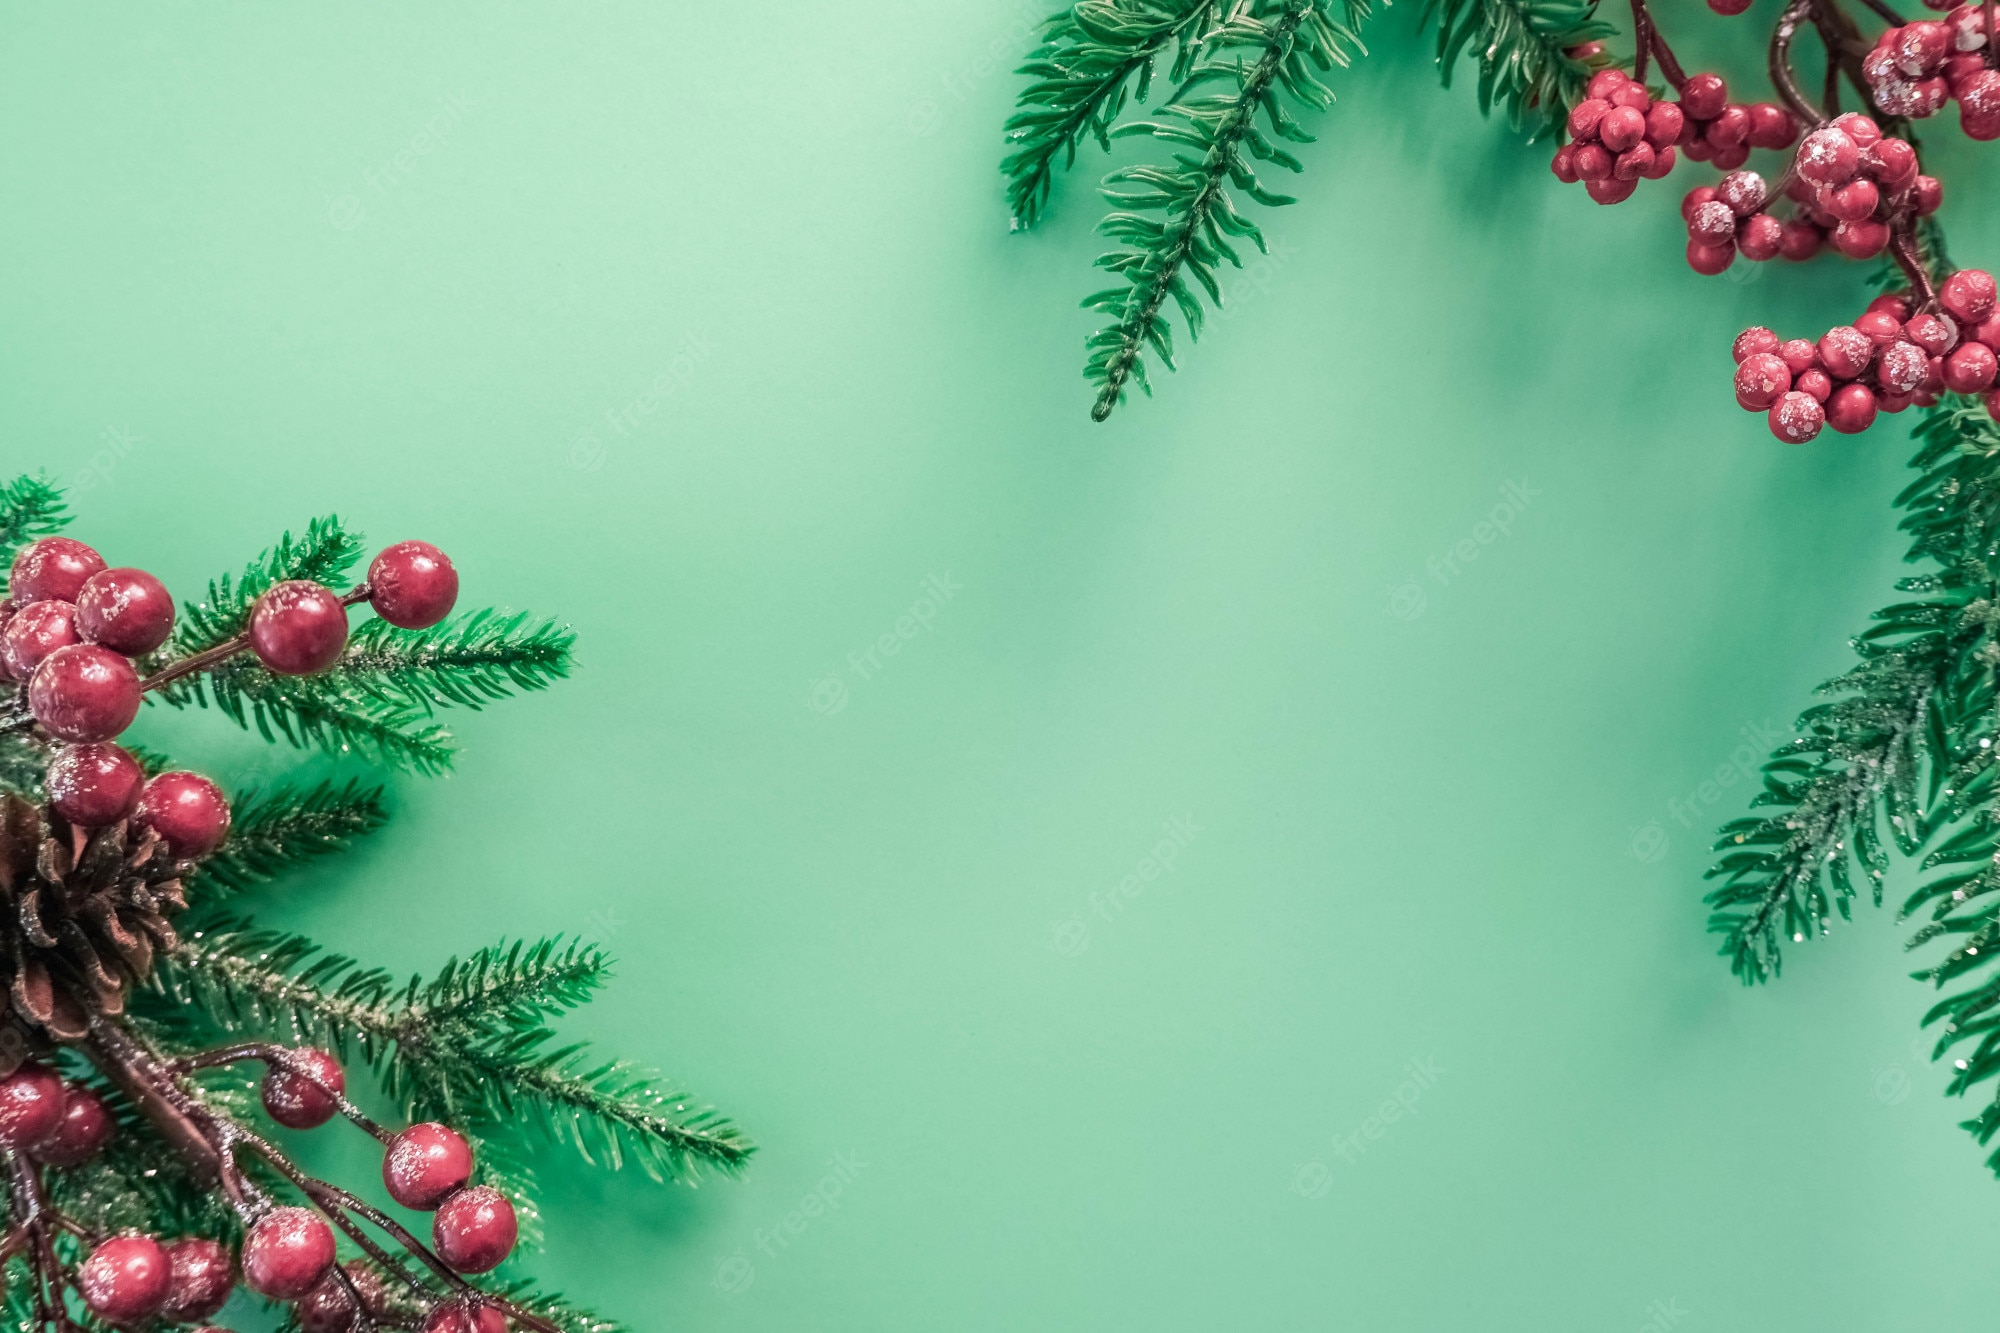 Premium Photo. Christmas decorations with red berries and fir branches on a beautiful mint background